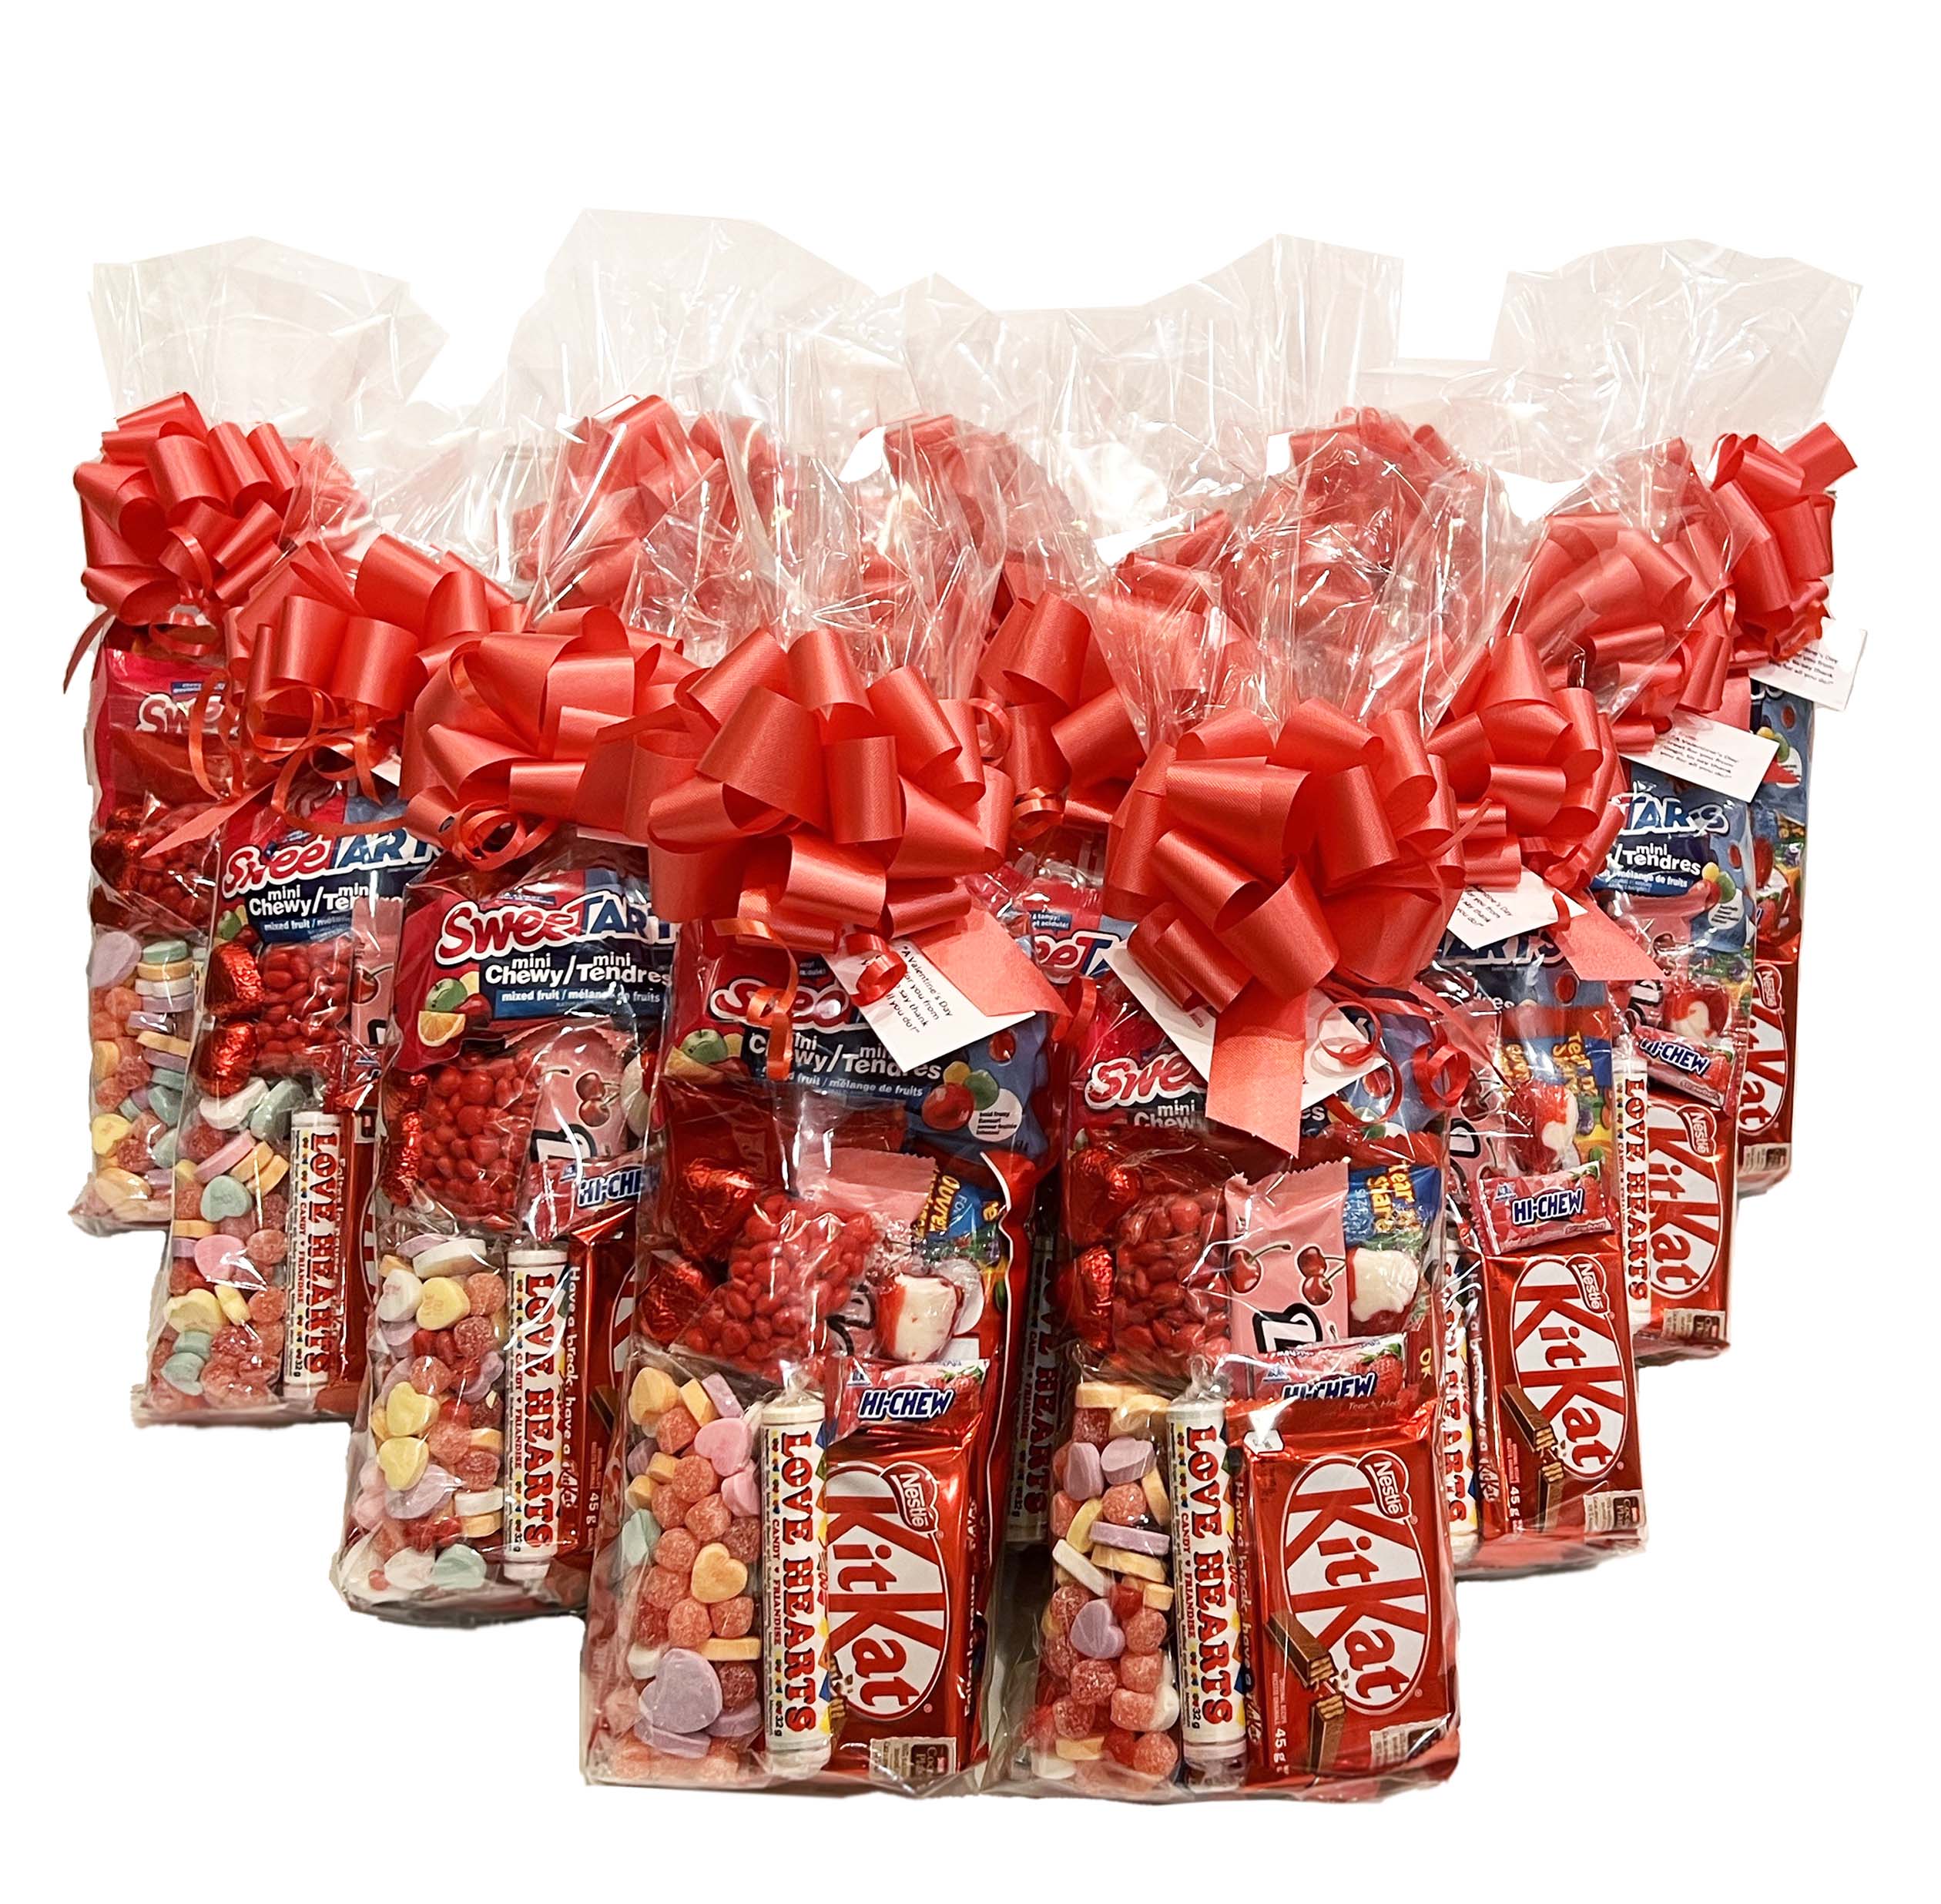 Favours & Treat Bags - Party Like an All Star!